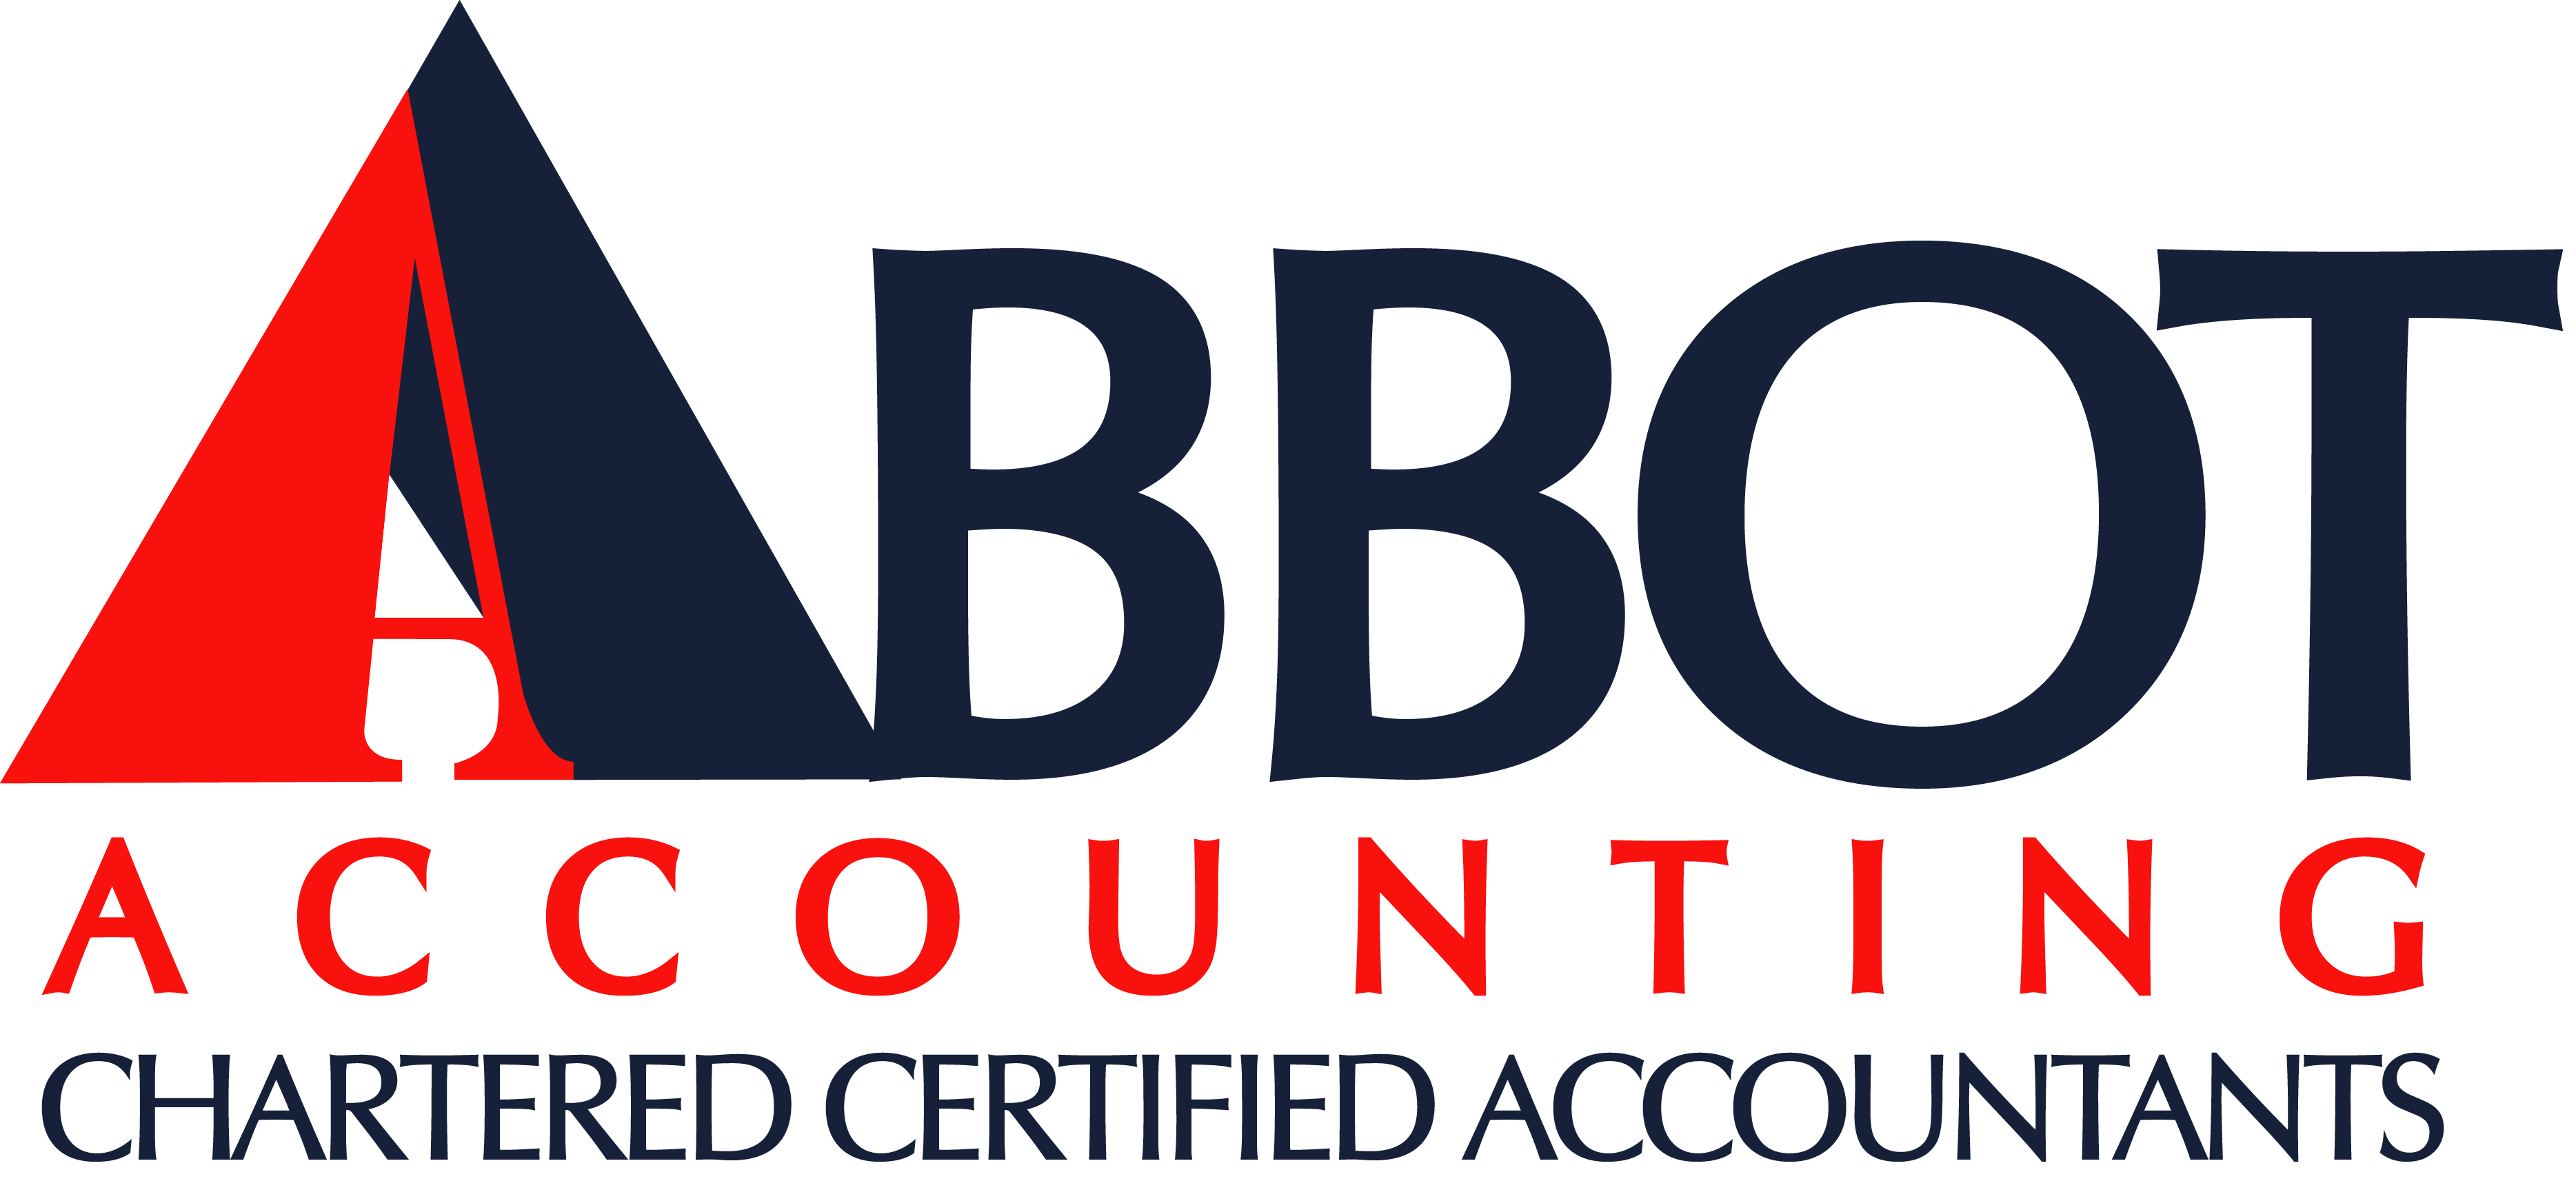 Need accountancy services? Contact Abbot Accounting